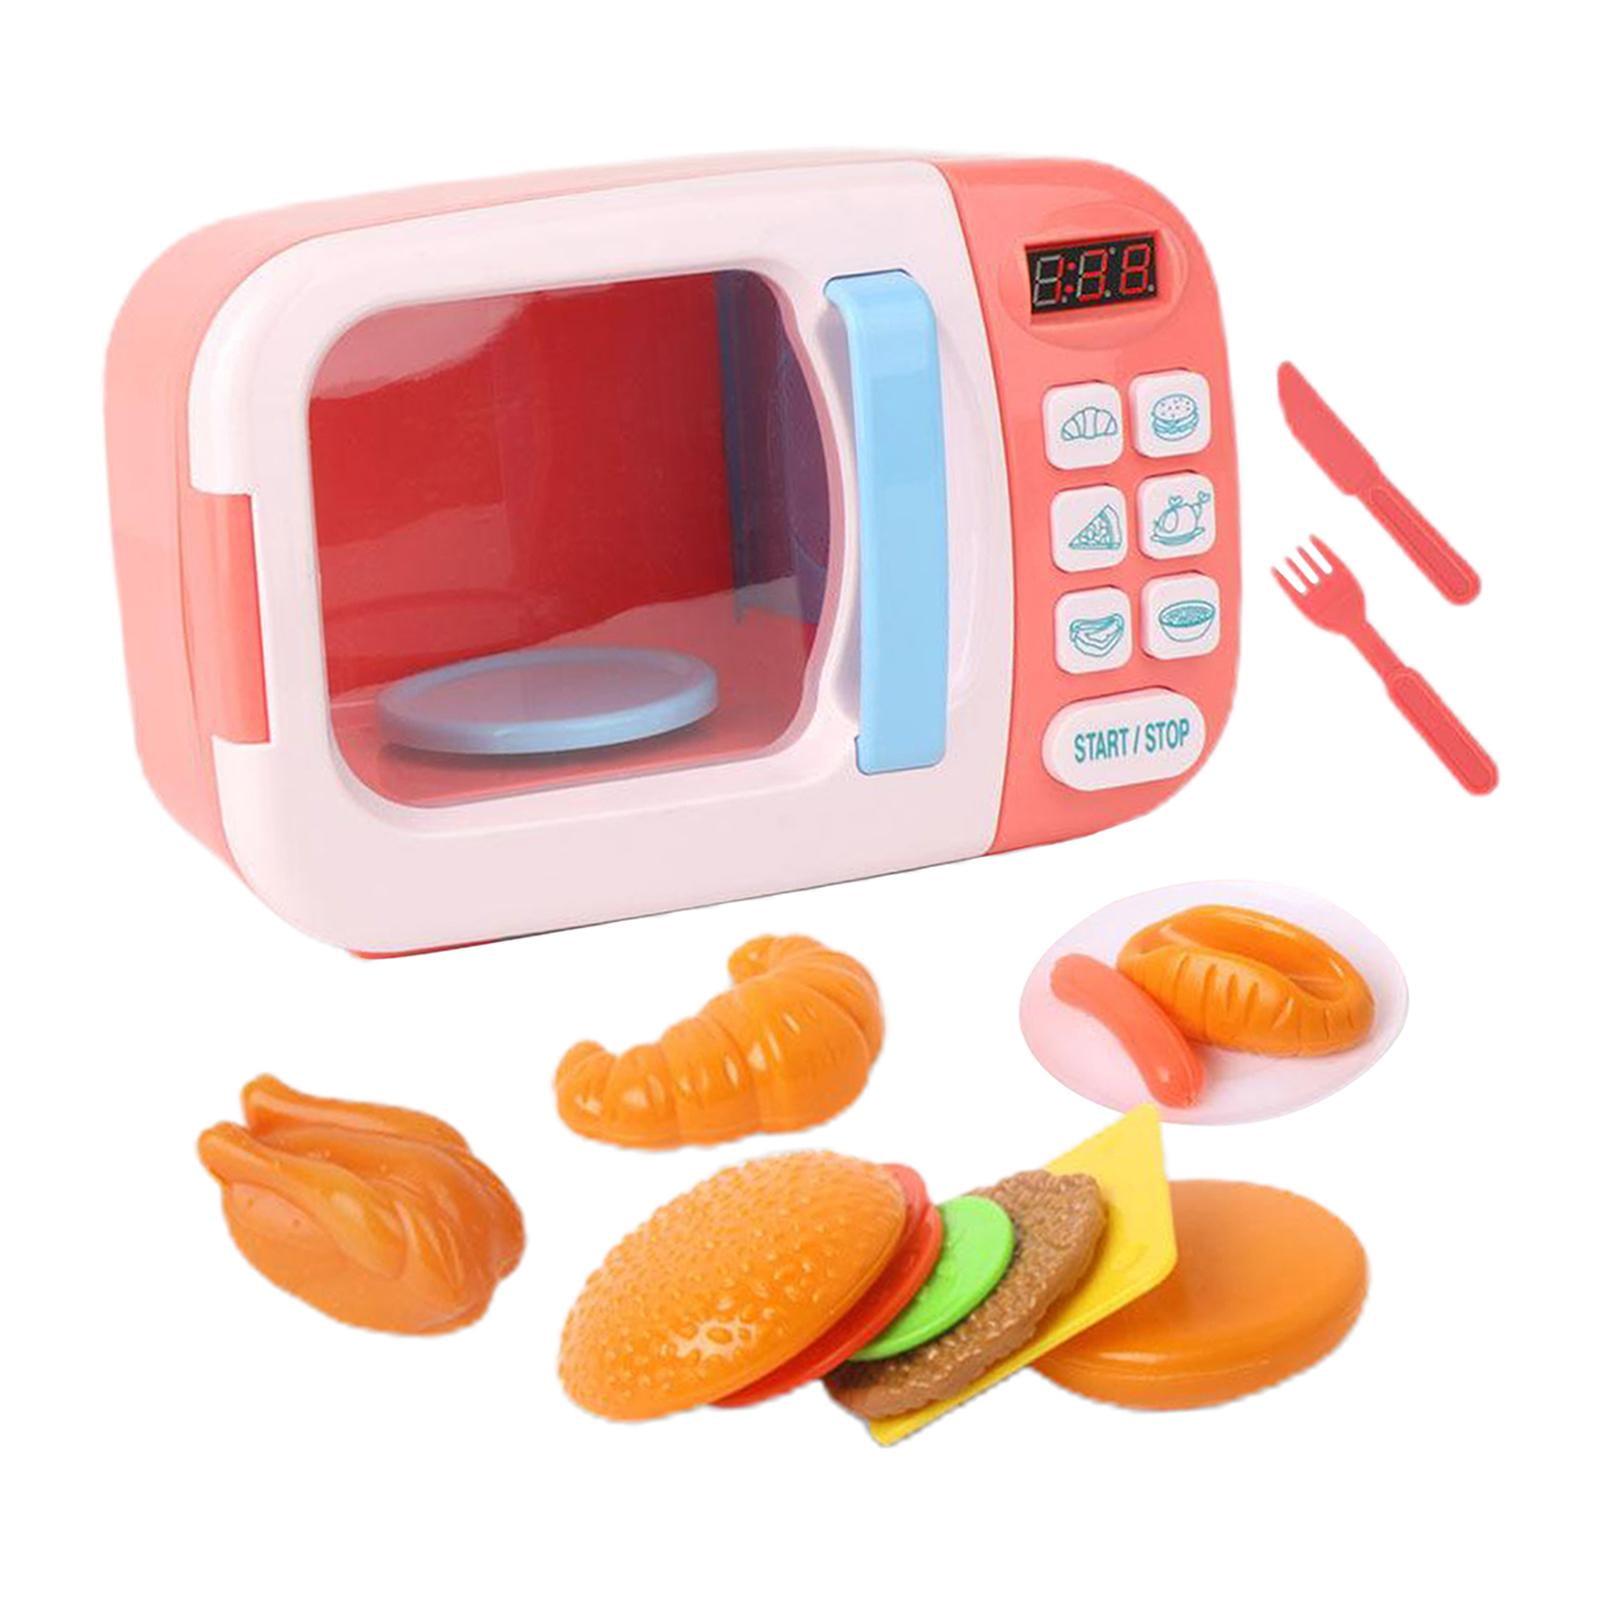 Mini Microwave Oven Dolls House Toys for Play Toys- Pink